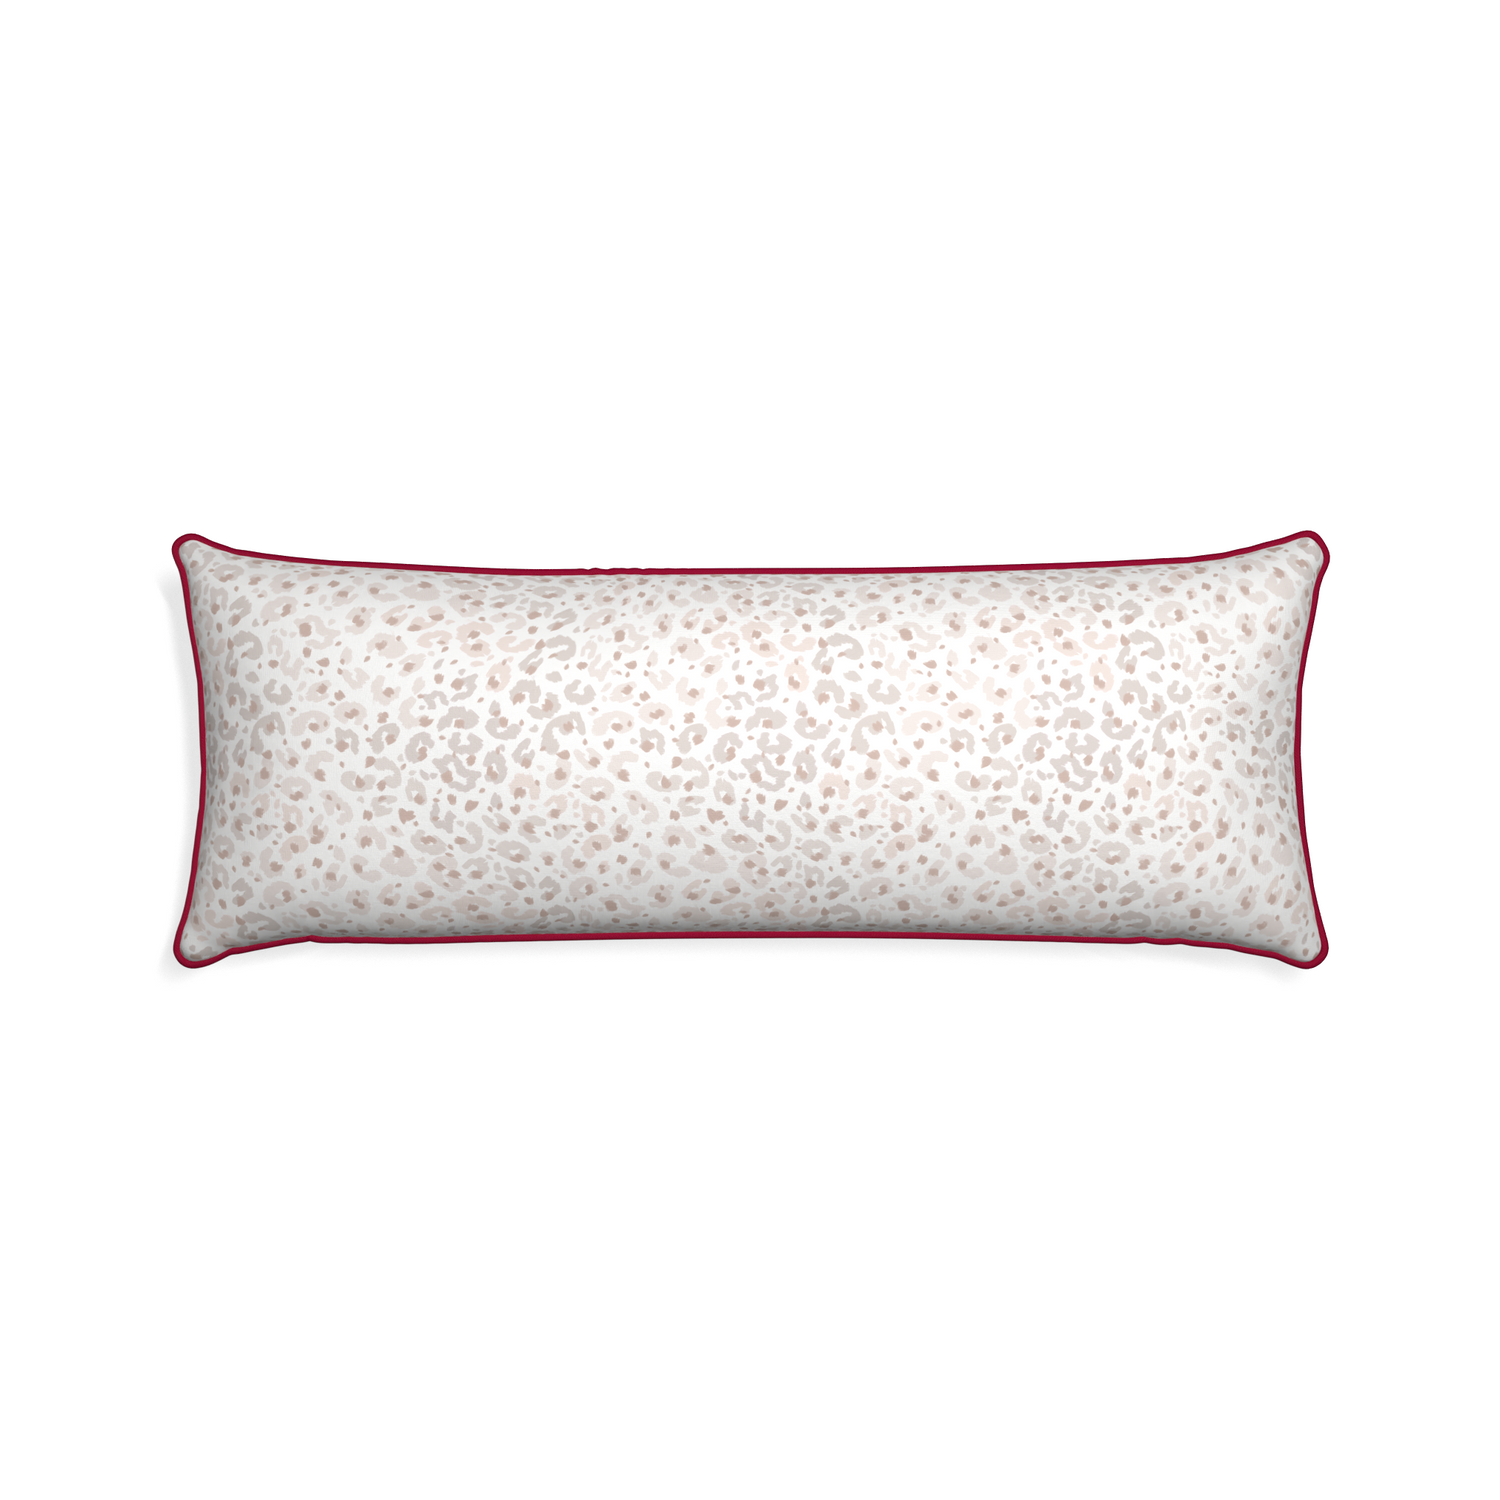 Xl-lumbar rosie custom pillow with raspberry piping on white background